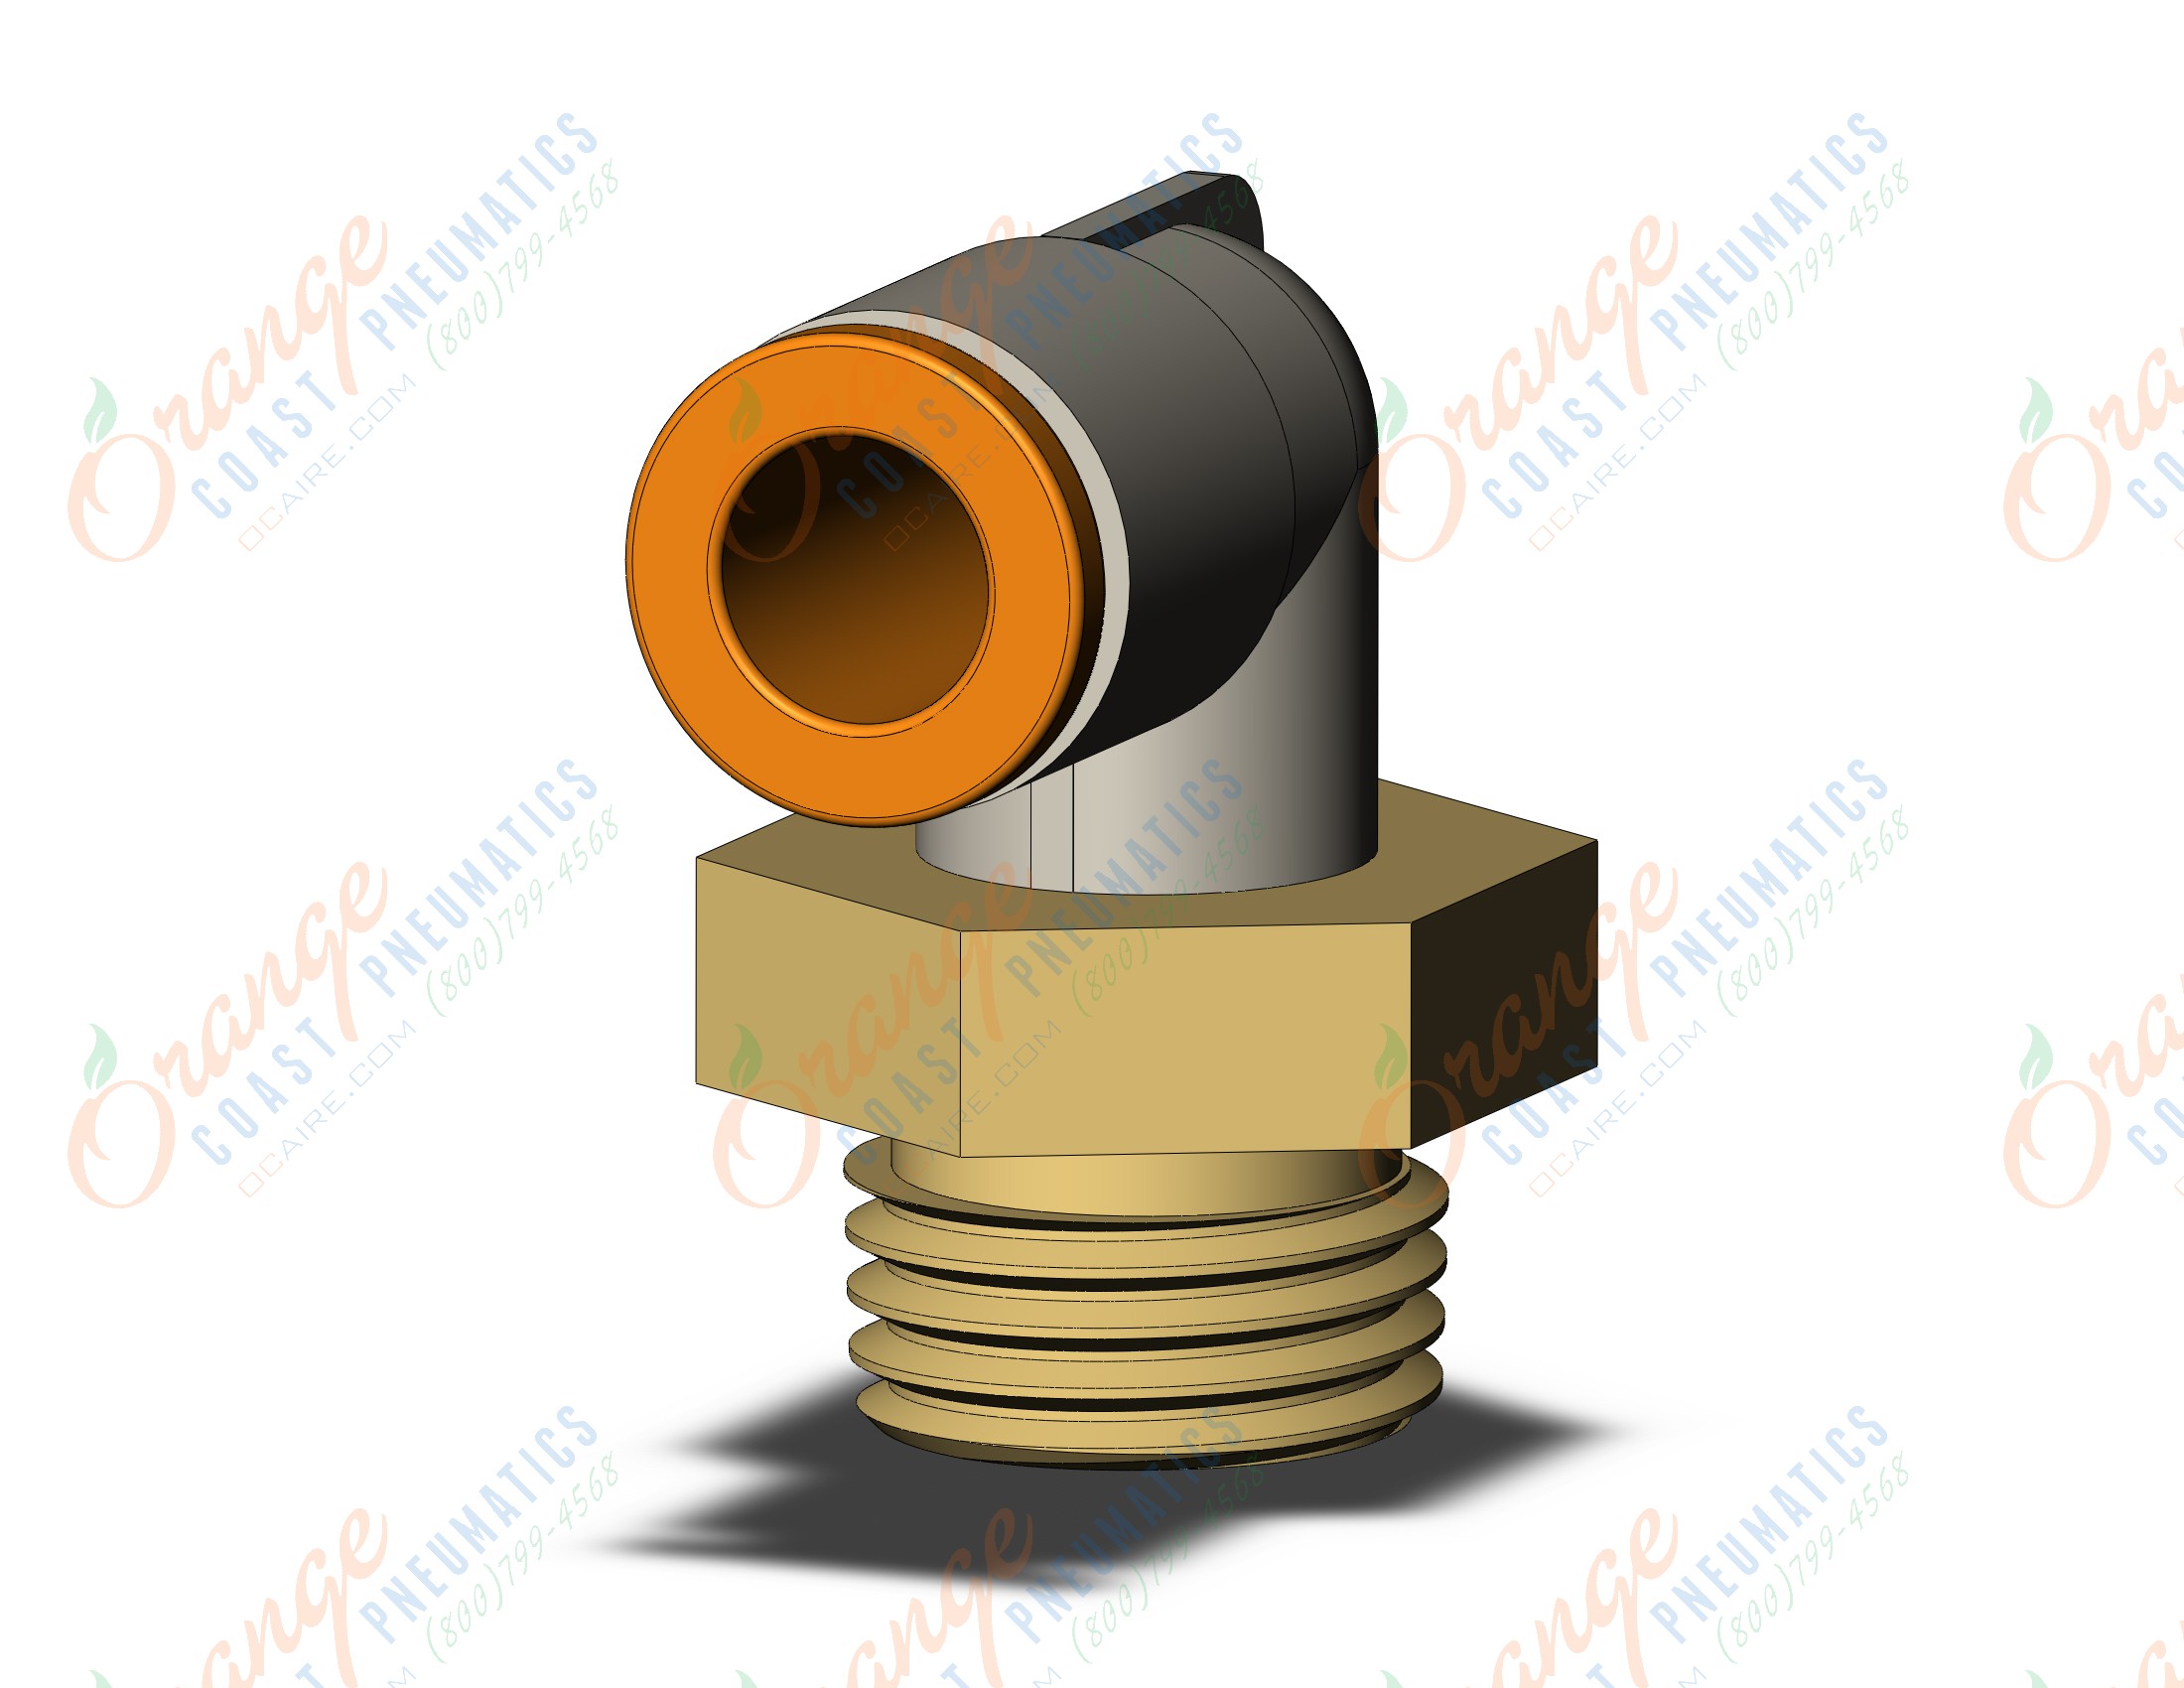 SMC KQ2L07-02AP fitting, male elbow, KQ2 FITTING (sold in packages of 10; price is per piece)